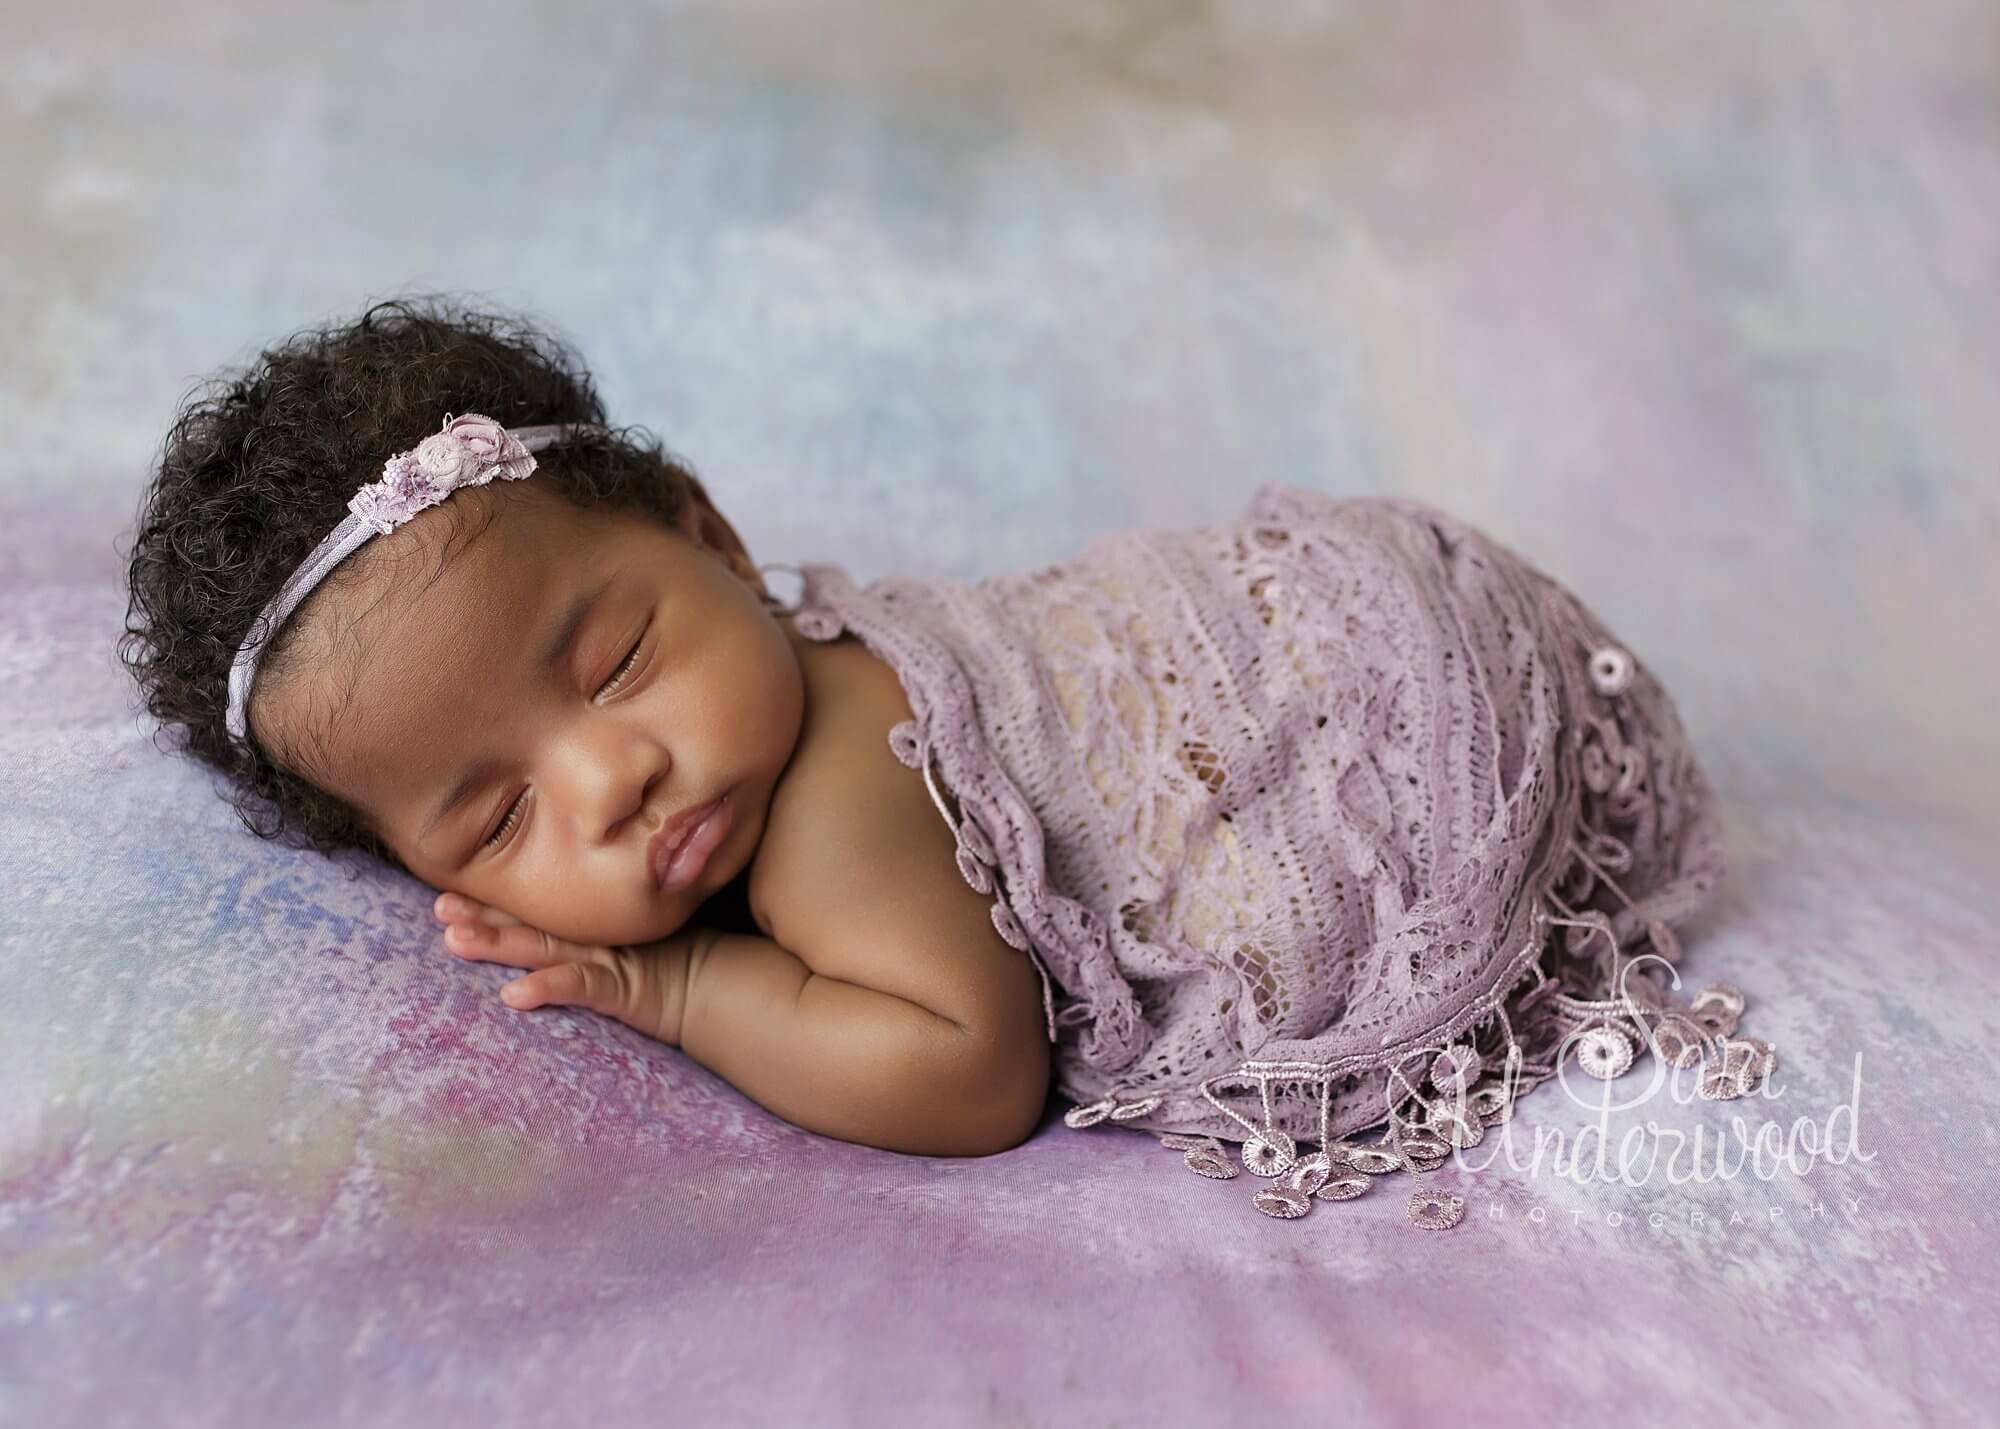 2-month old baby girl at an Orlando Baby Photography Studio